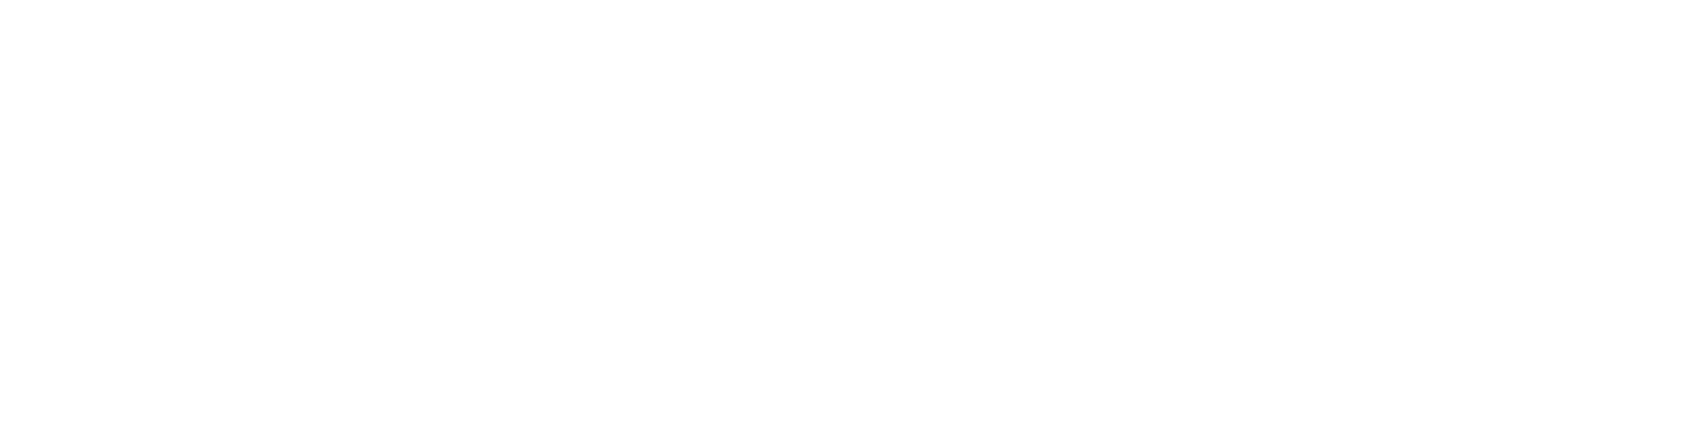 Melbourne Wide Disability Services | NDIS Care in Melbourne